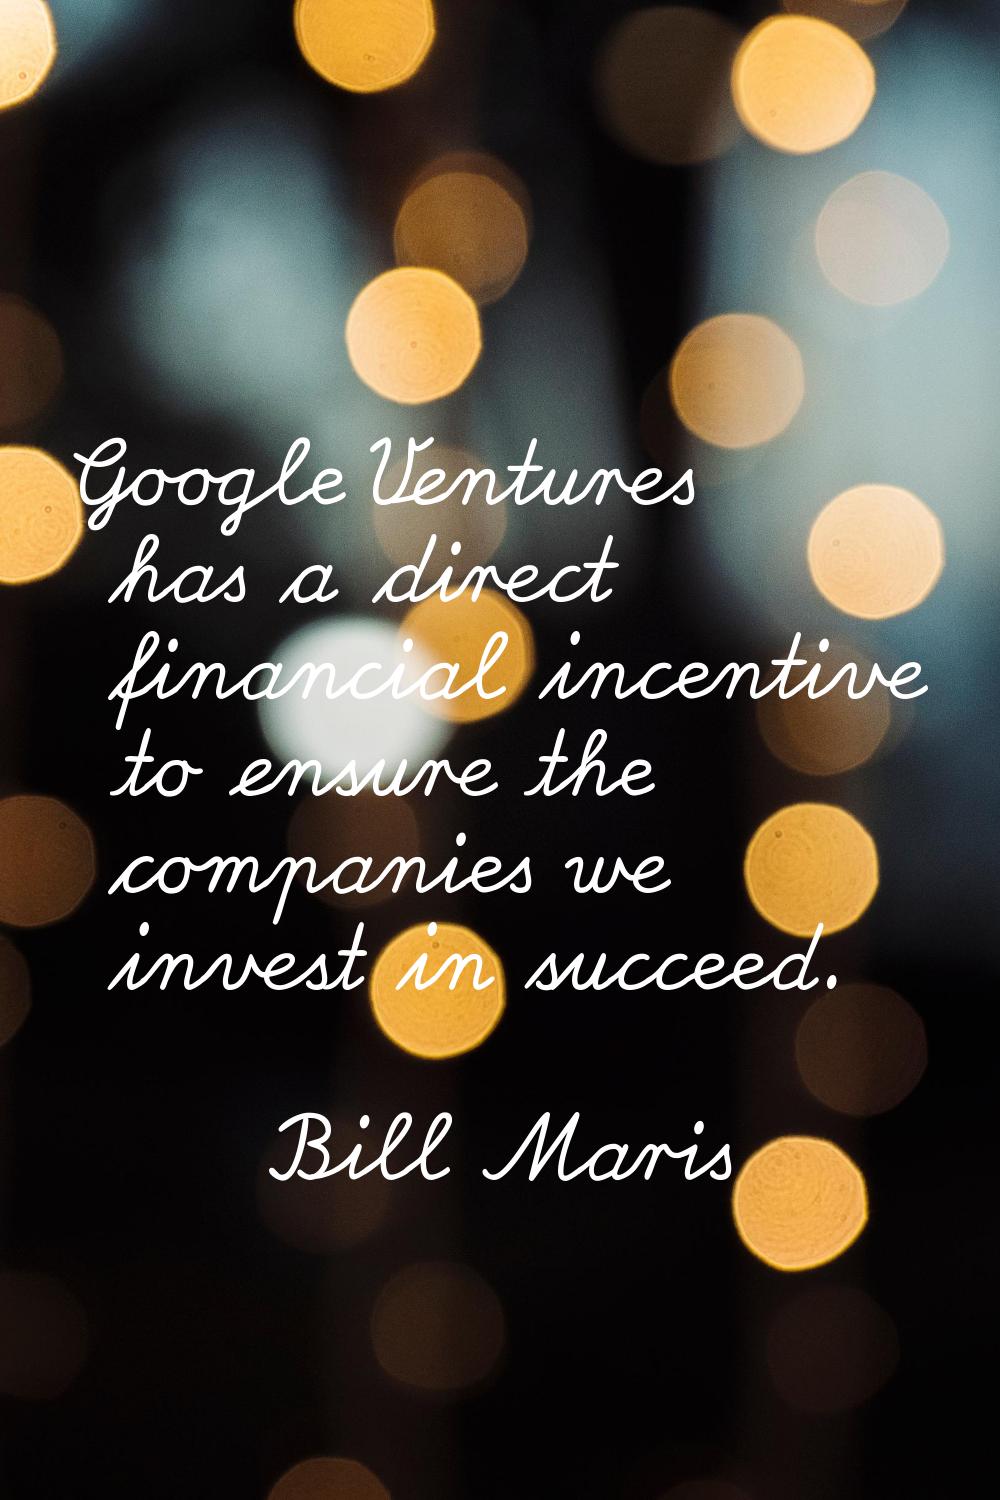 Google Ventures has a direct financial incentive to ensure the companies we invest in succeed.